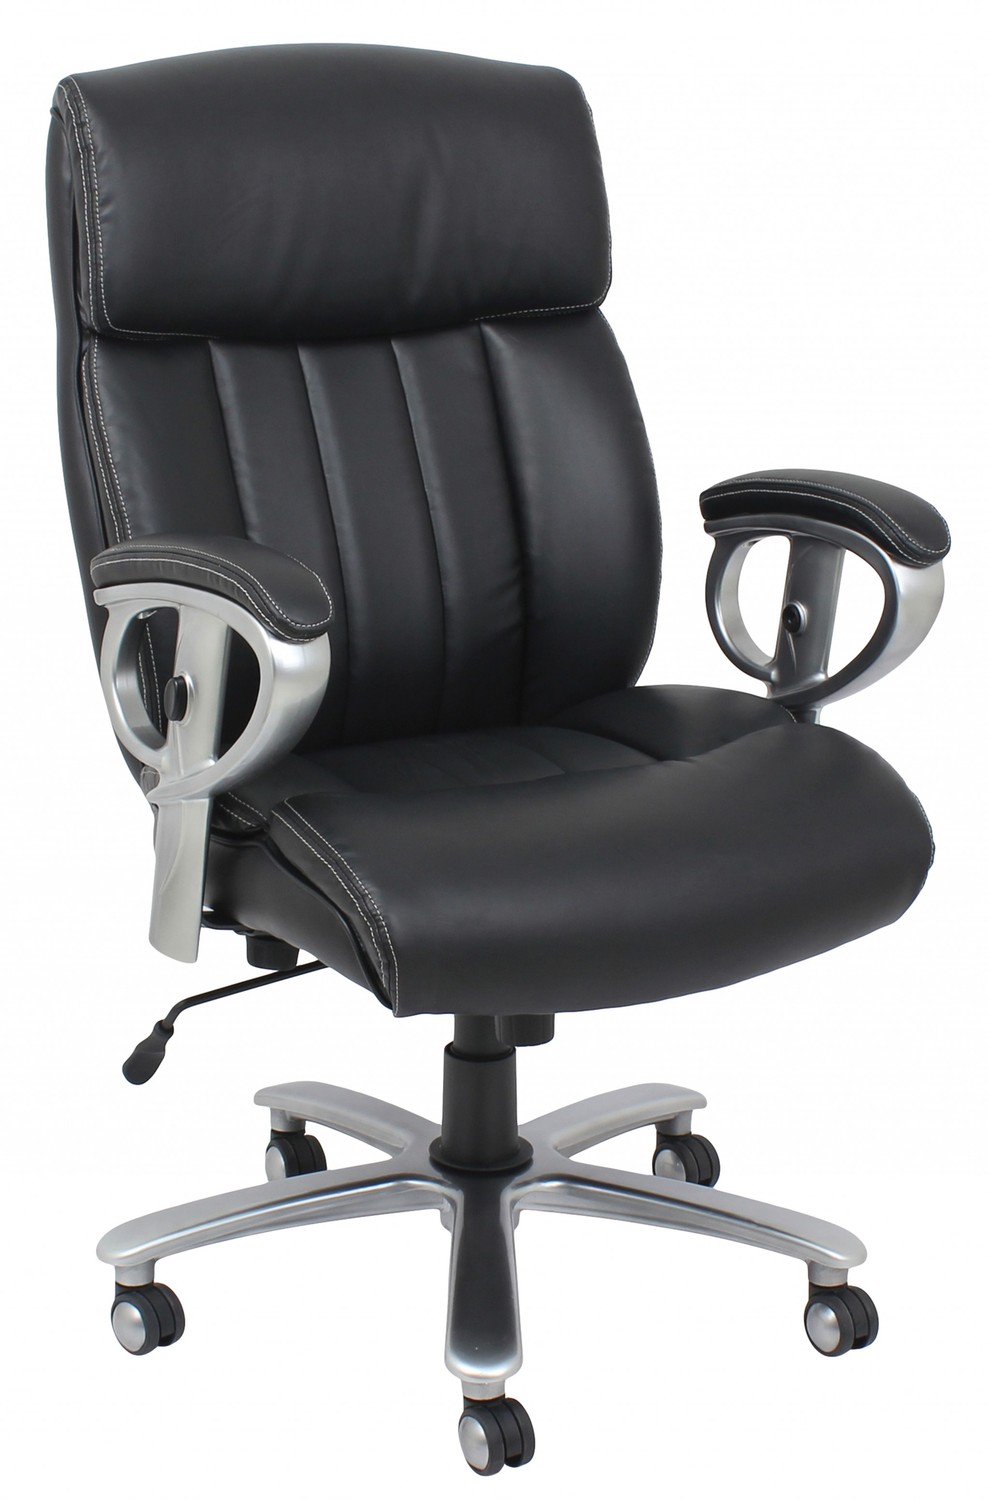 Office Chair With Pneumatic Lift, Black Bonded Leather Match - Bonded Leather, Pvc, Meta Black Blm